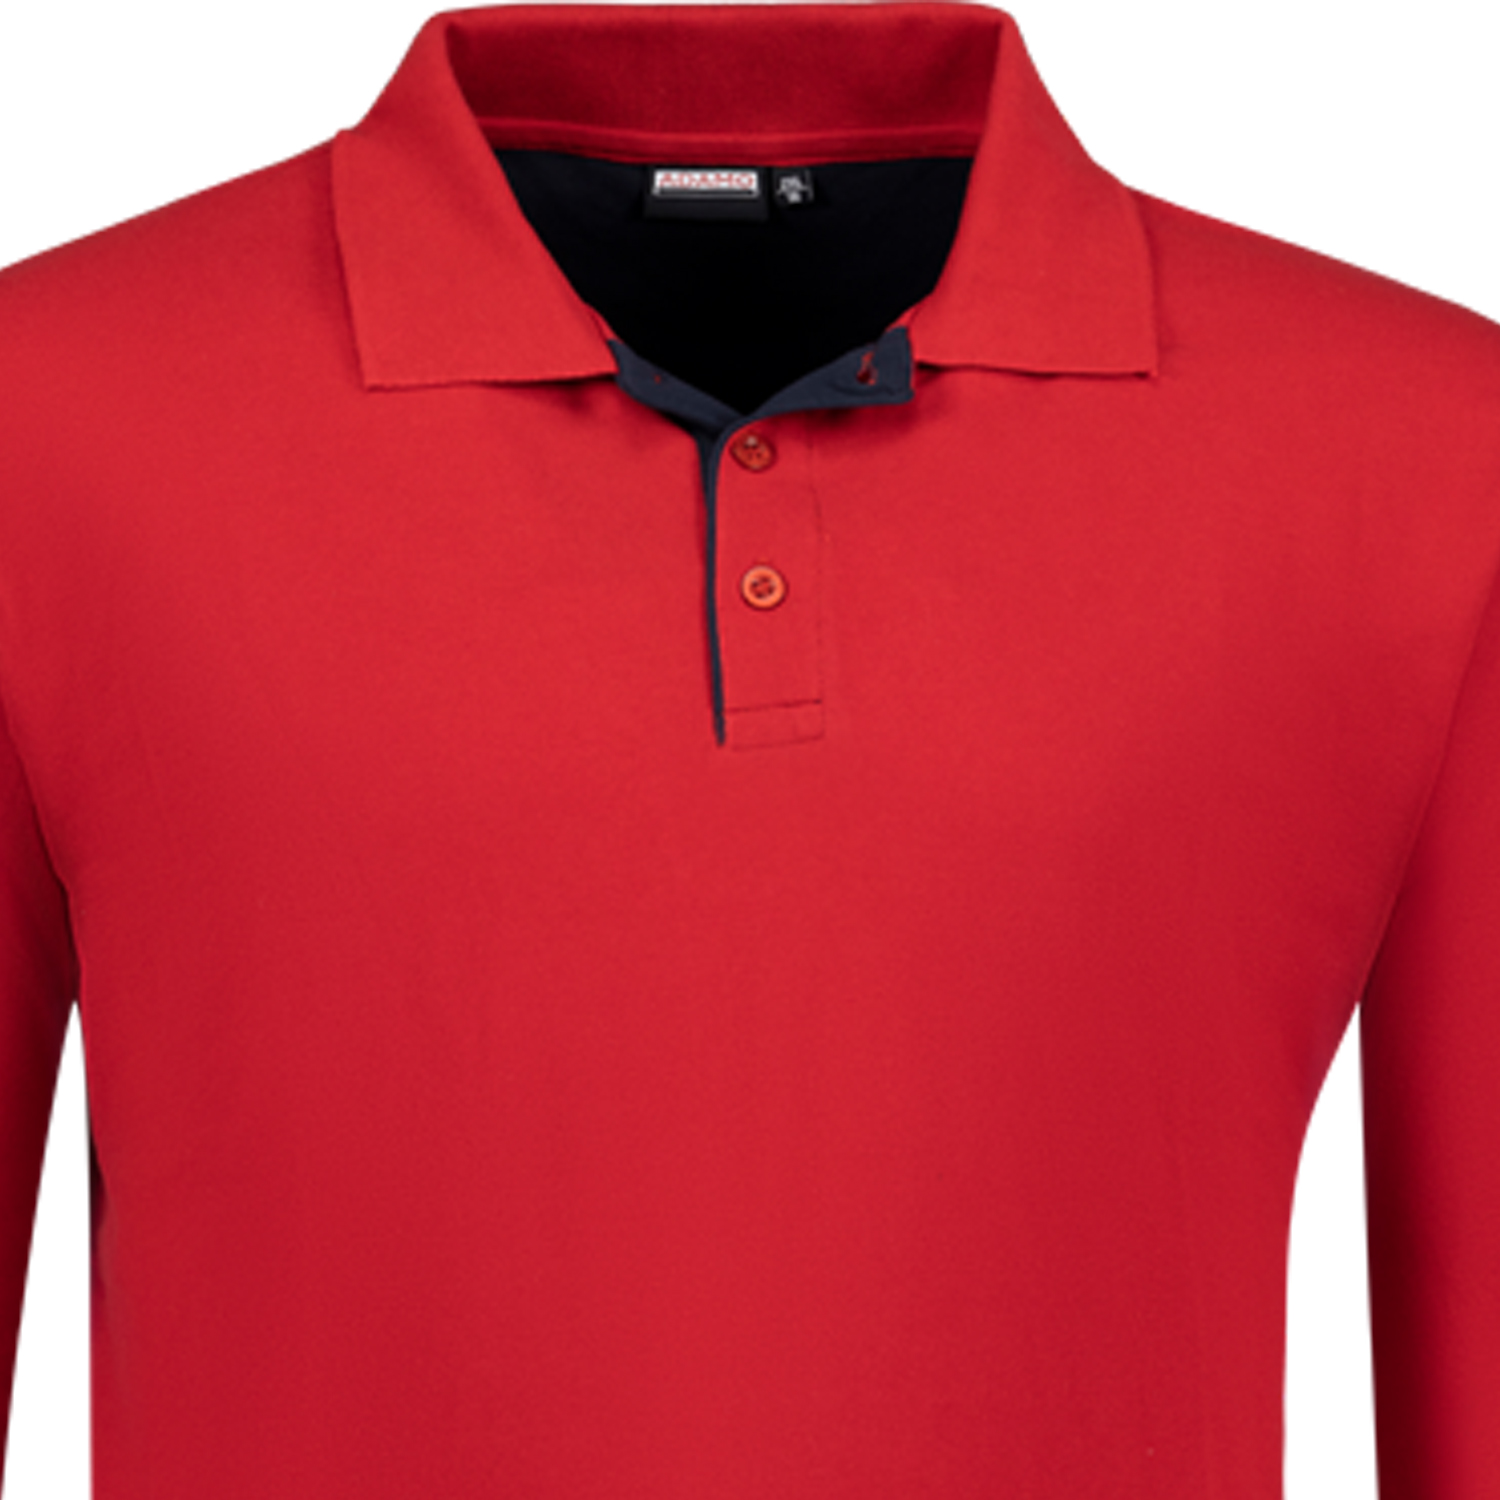 Long sleeve polo shirt COMFORT FIT in red serie Peter by Adamo up to oversize 12XL